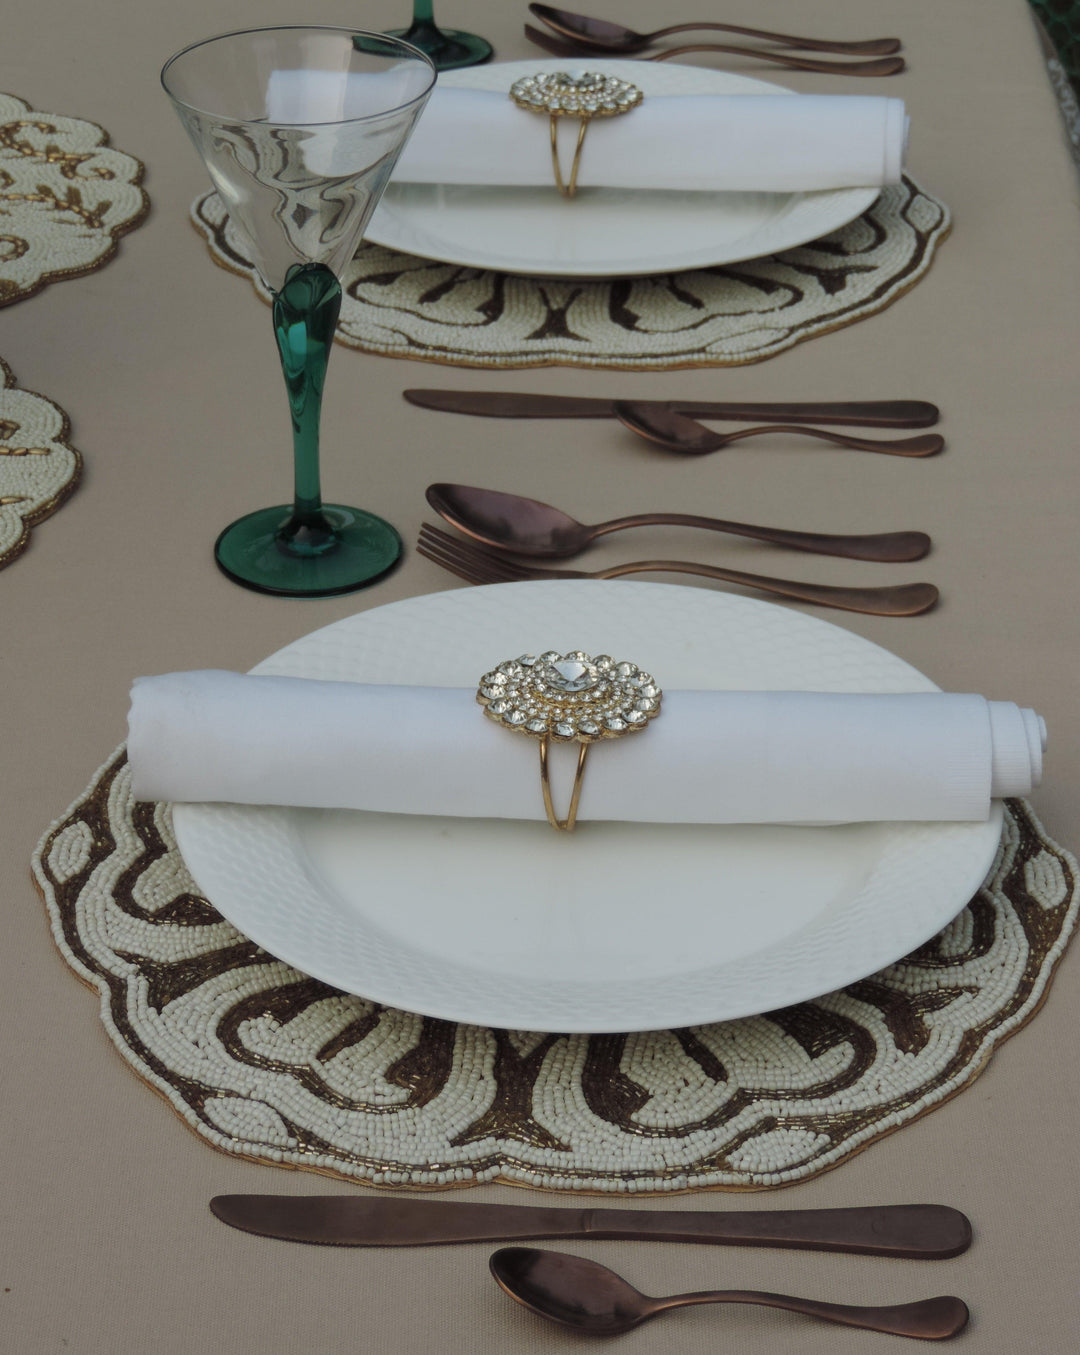 Glass Bead Embroidered Placemats, Chargers / Set of 2 / 14in. Round / Cream & Gold - trunkin.in